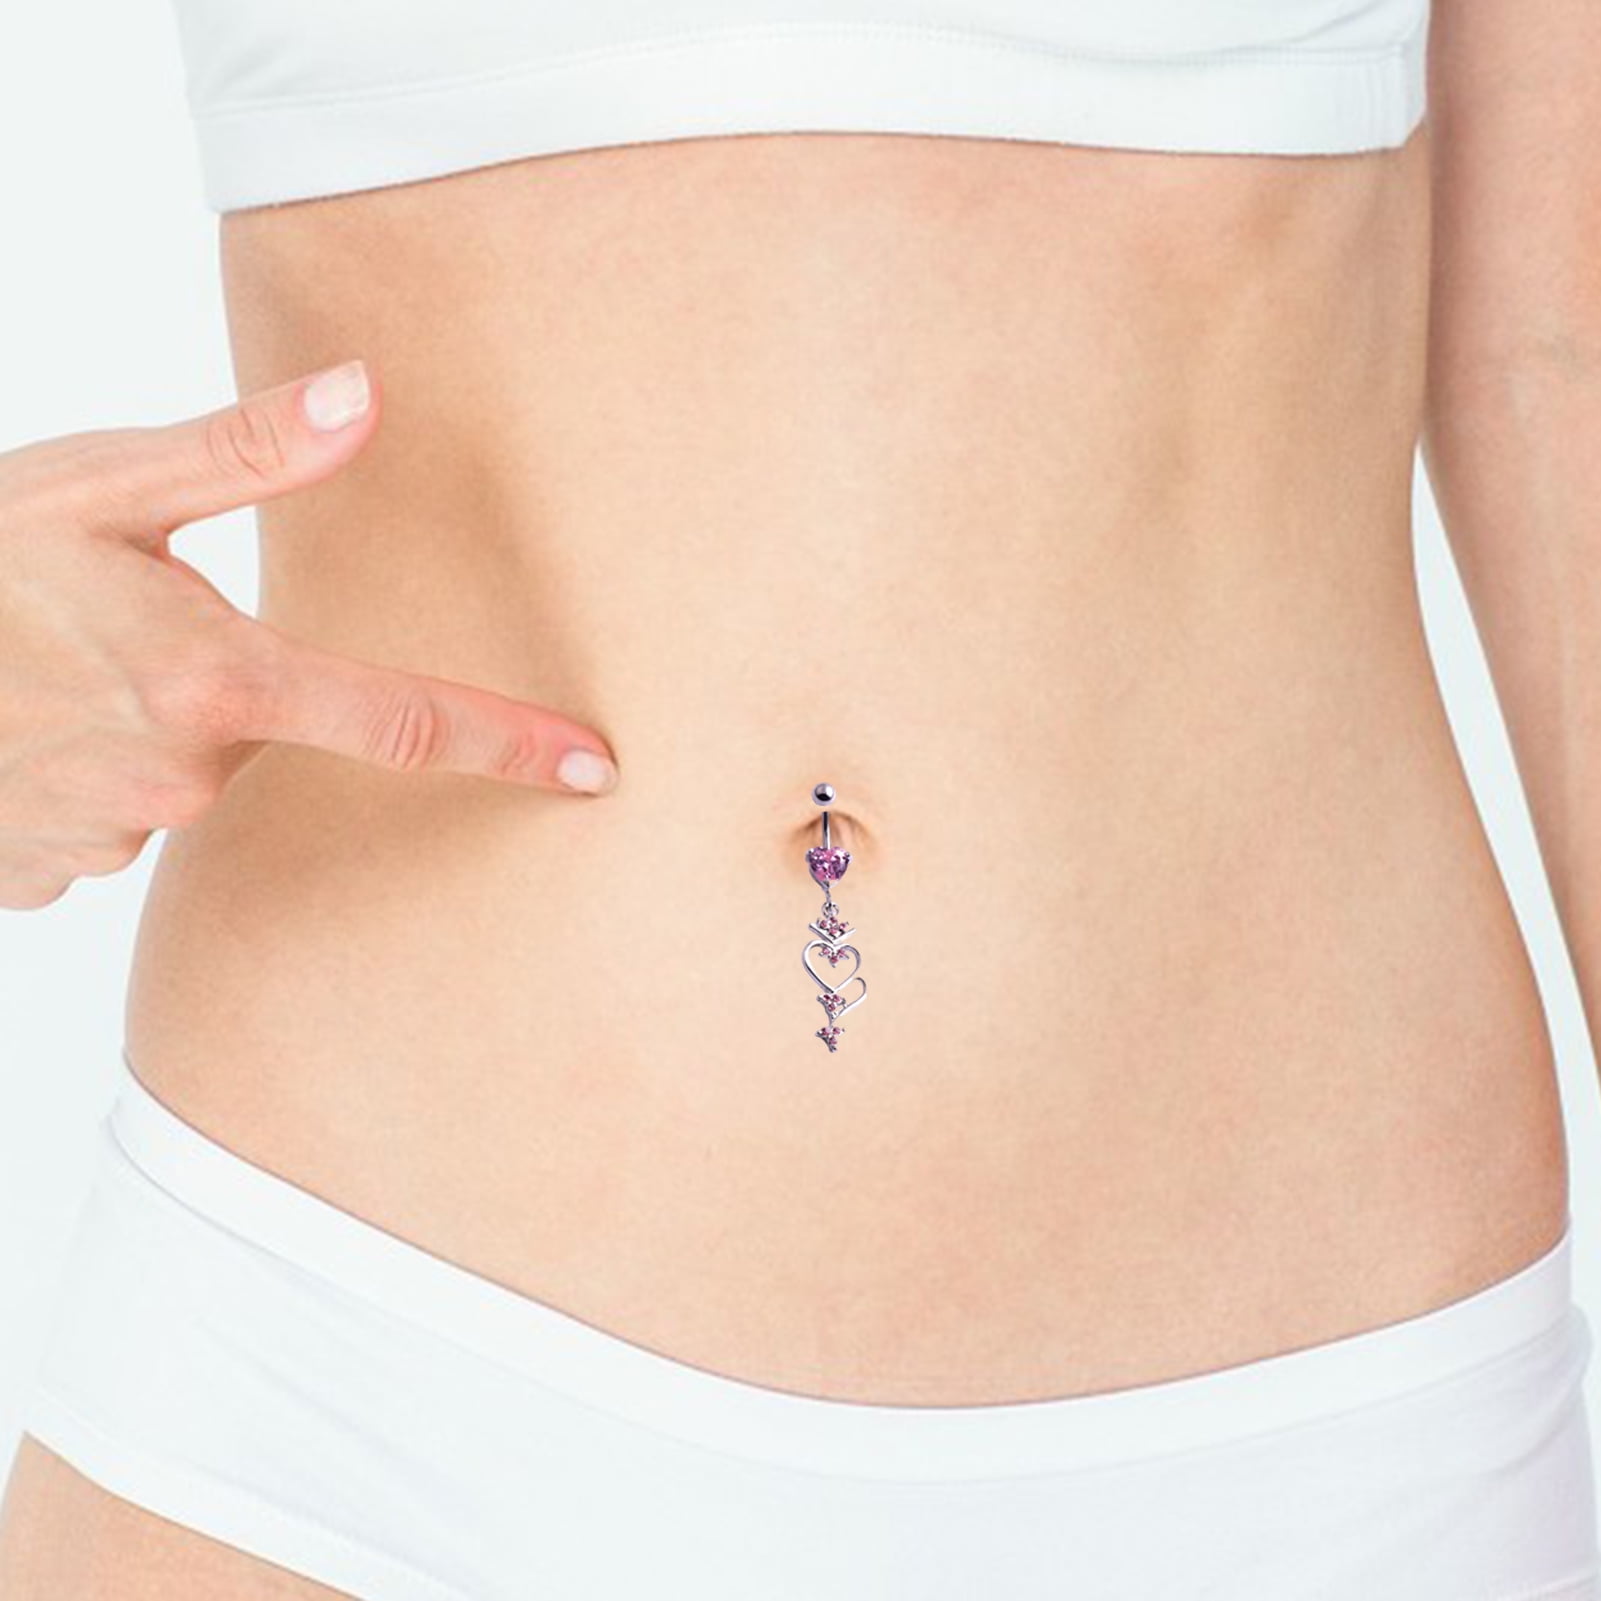 Belly Button Piercings Explained And FAQs Answered By A Pro | Glamour UK